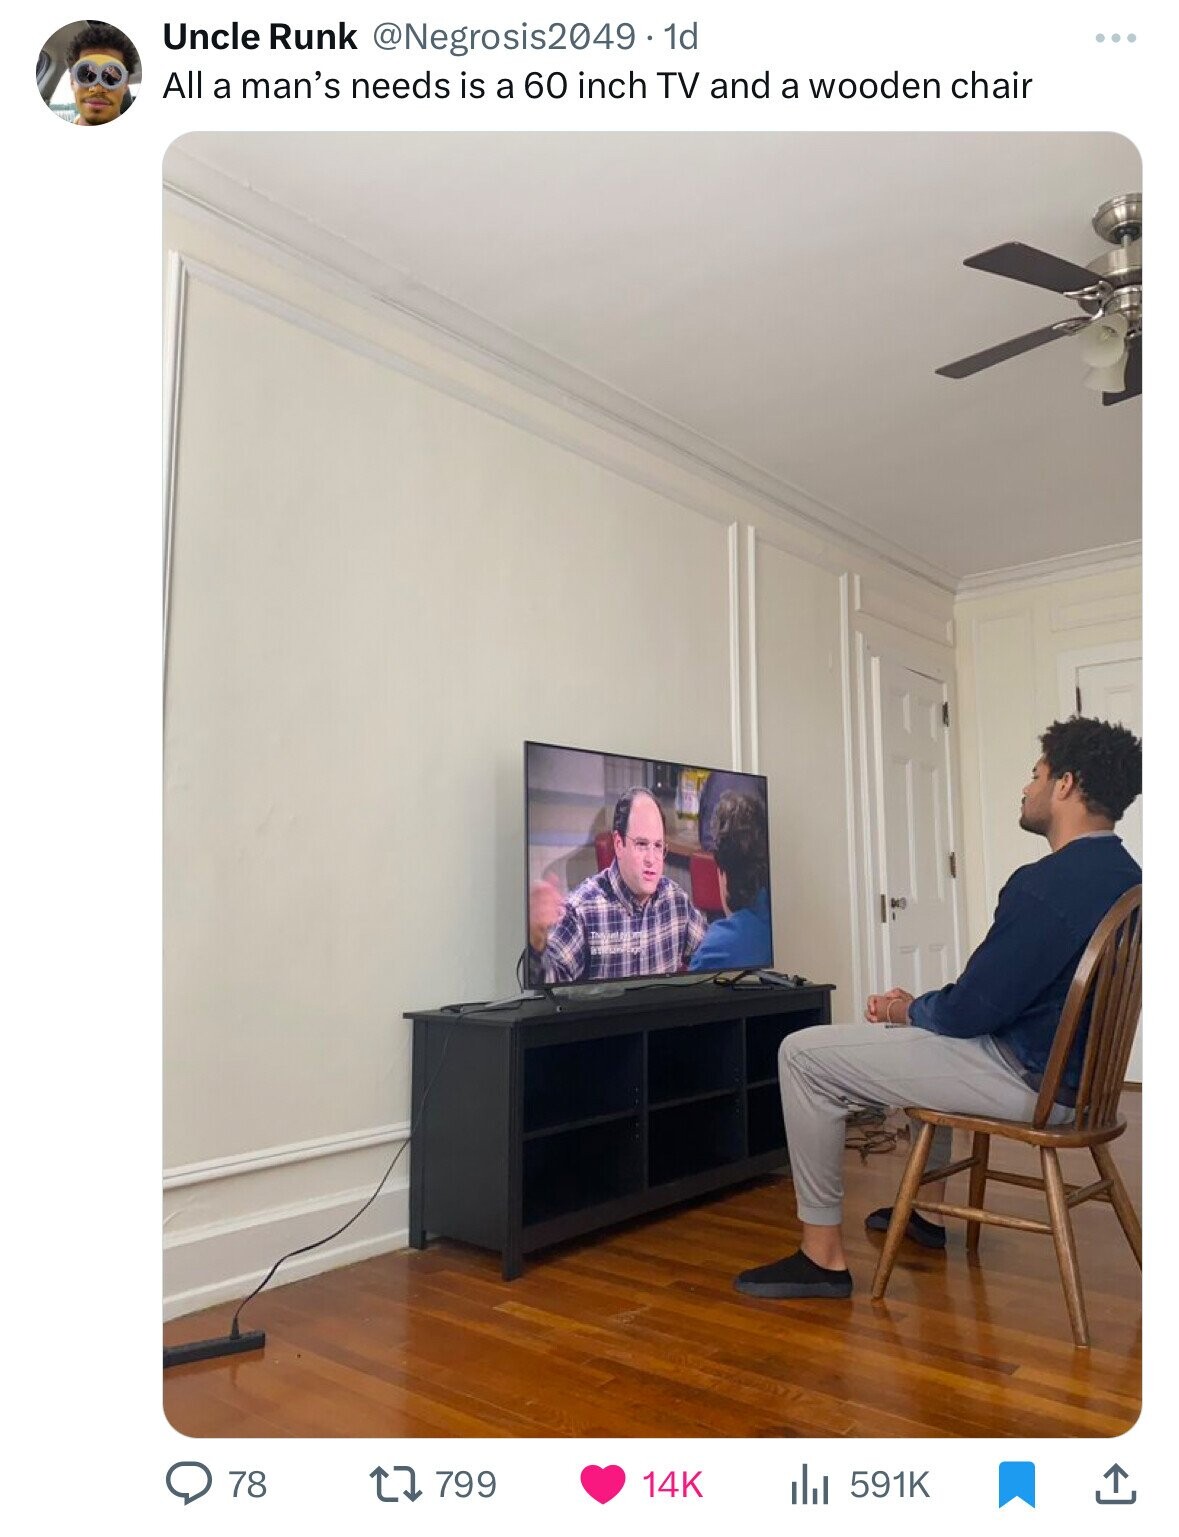 interior design - Uncle Runk 1d All a man's needs is a 60 inch Tv and a wooden chair 78 ...